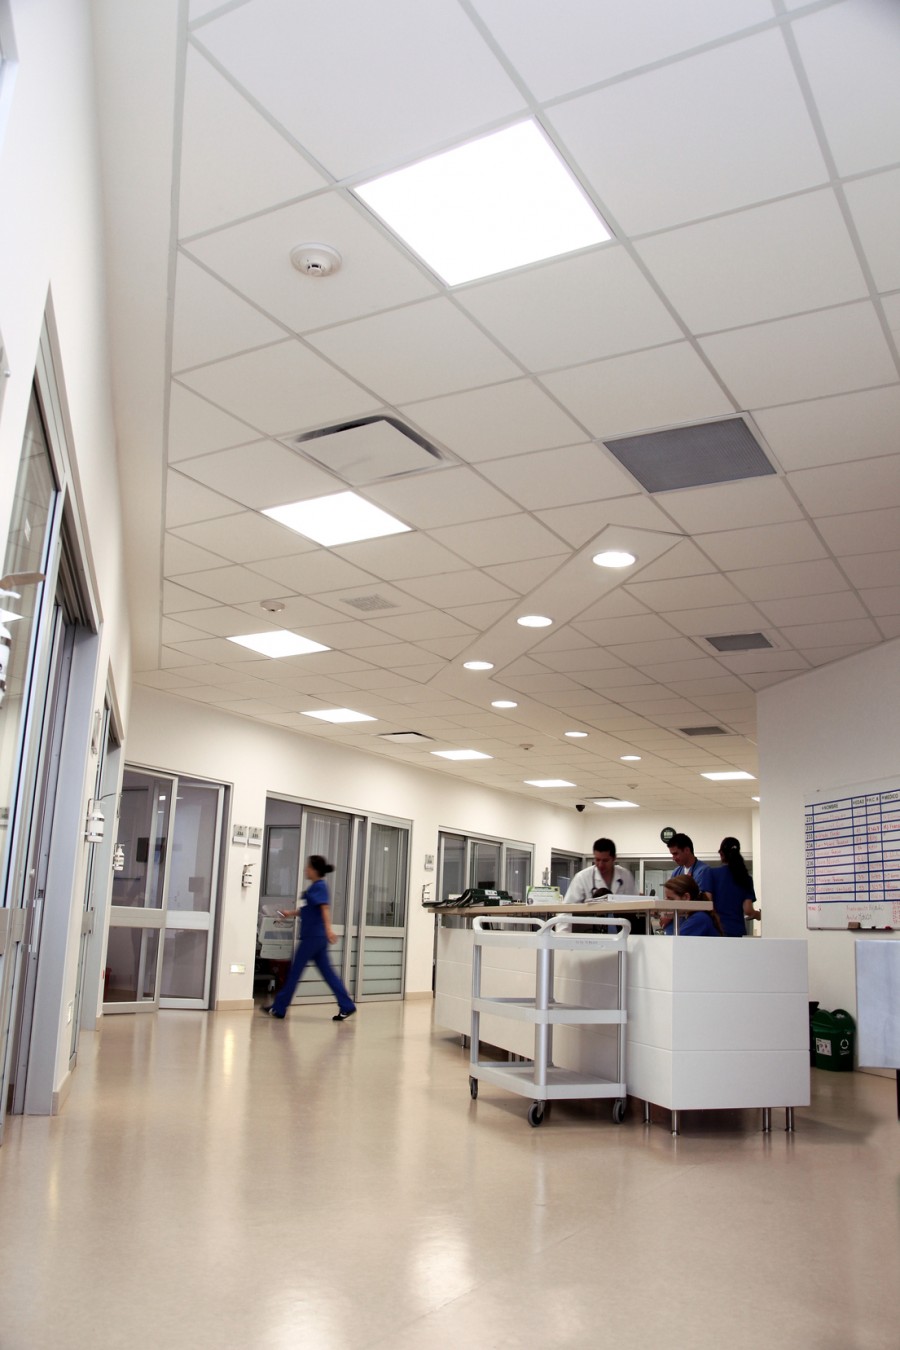 Acoustic ceiling solutions for the healthcare sector